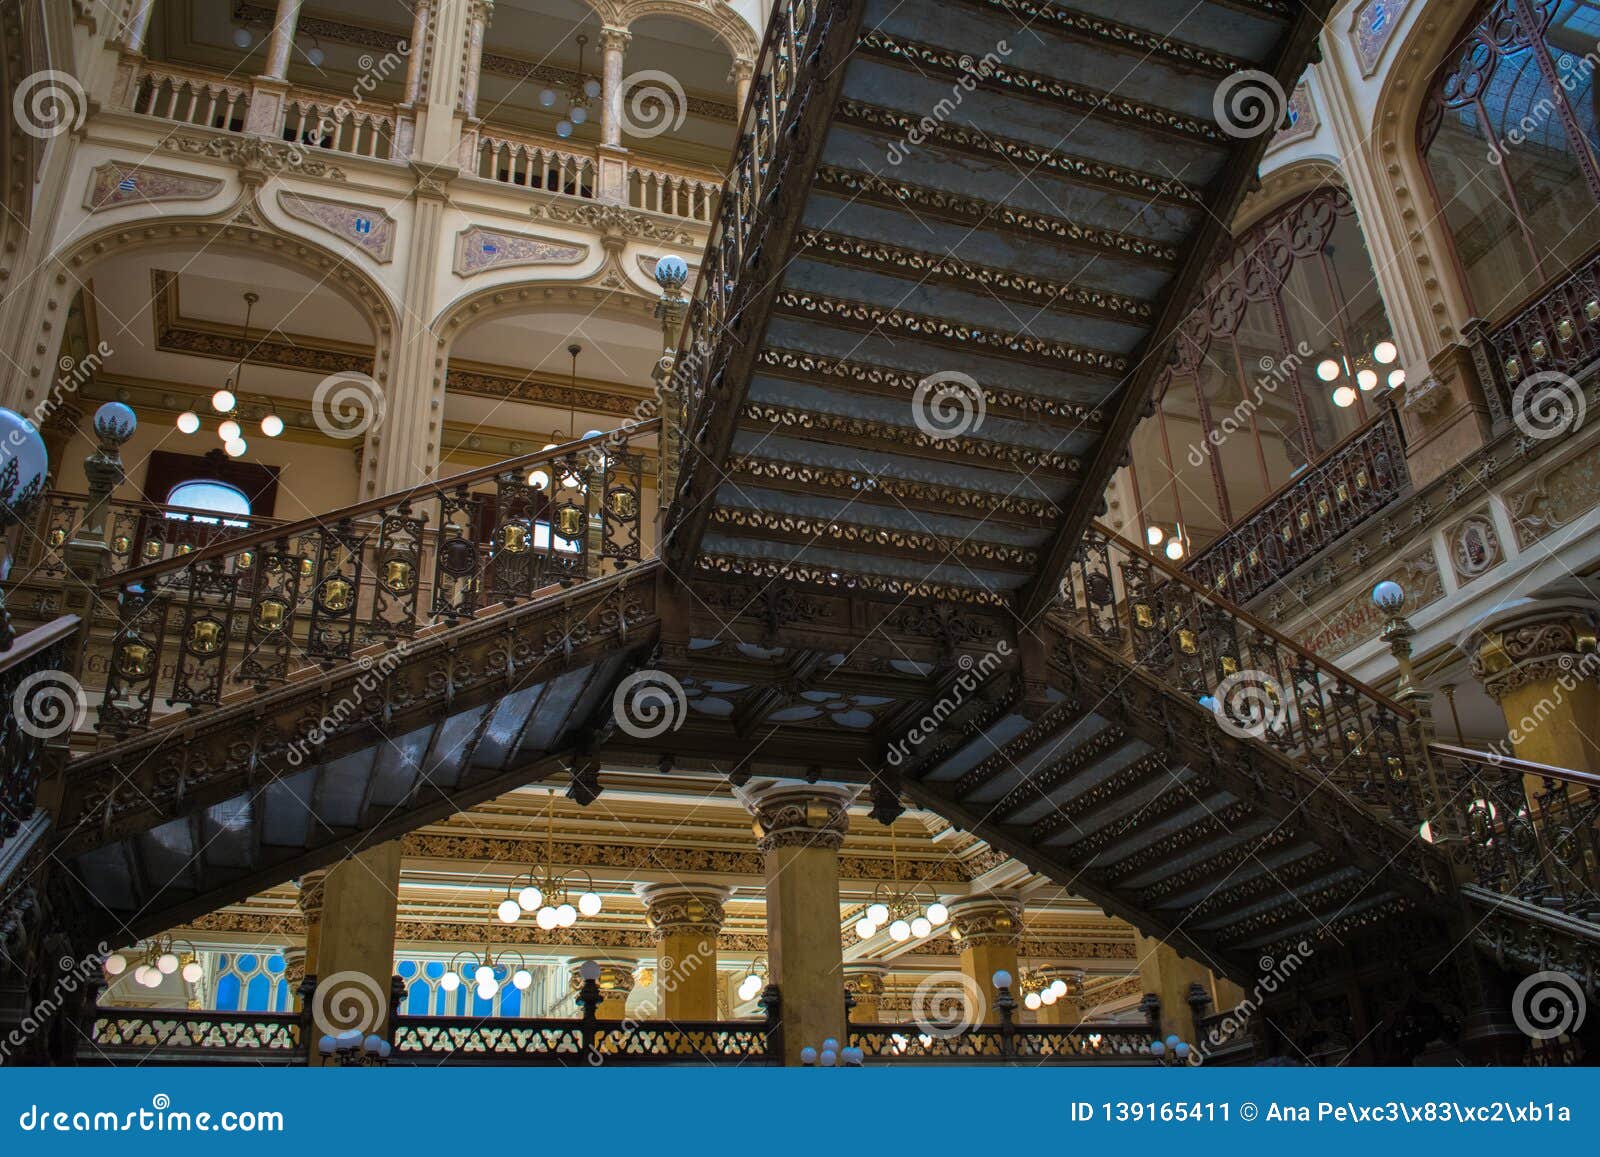 Stairs Main Post Office Mexico Stock Image - Image of architecture,  interior: 139165411